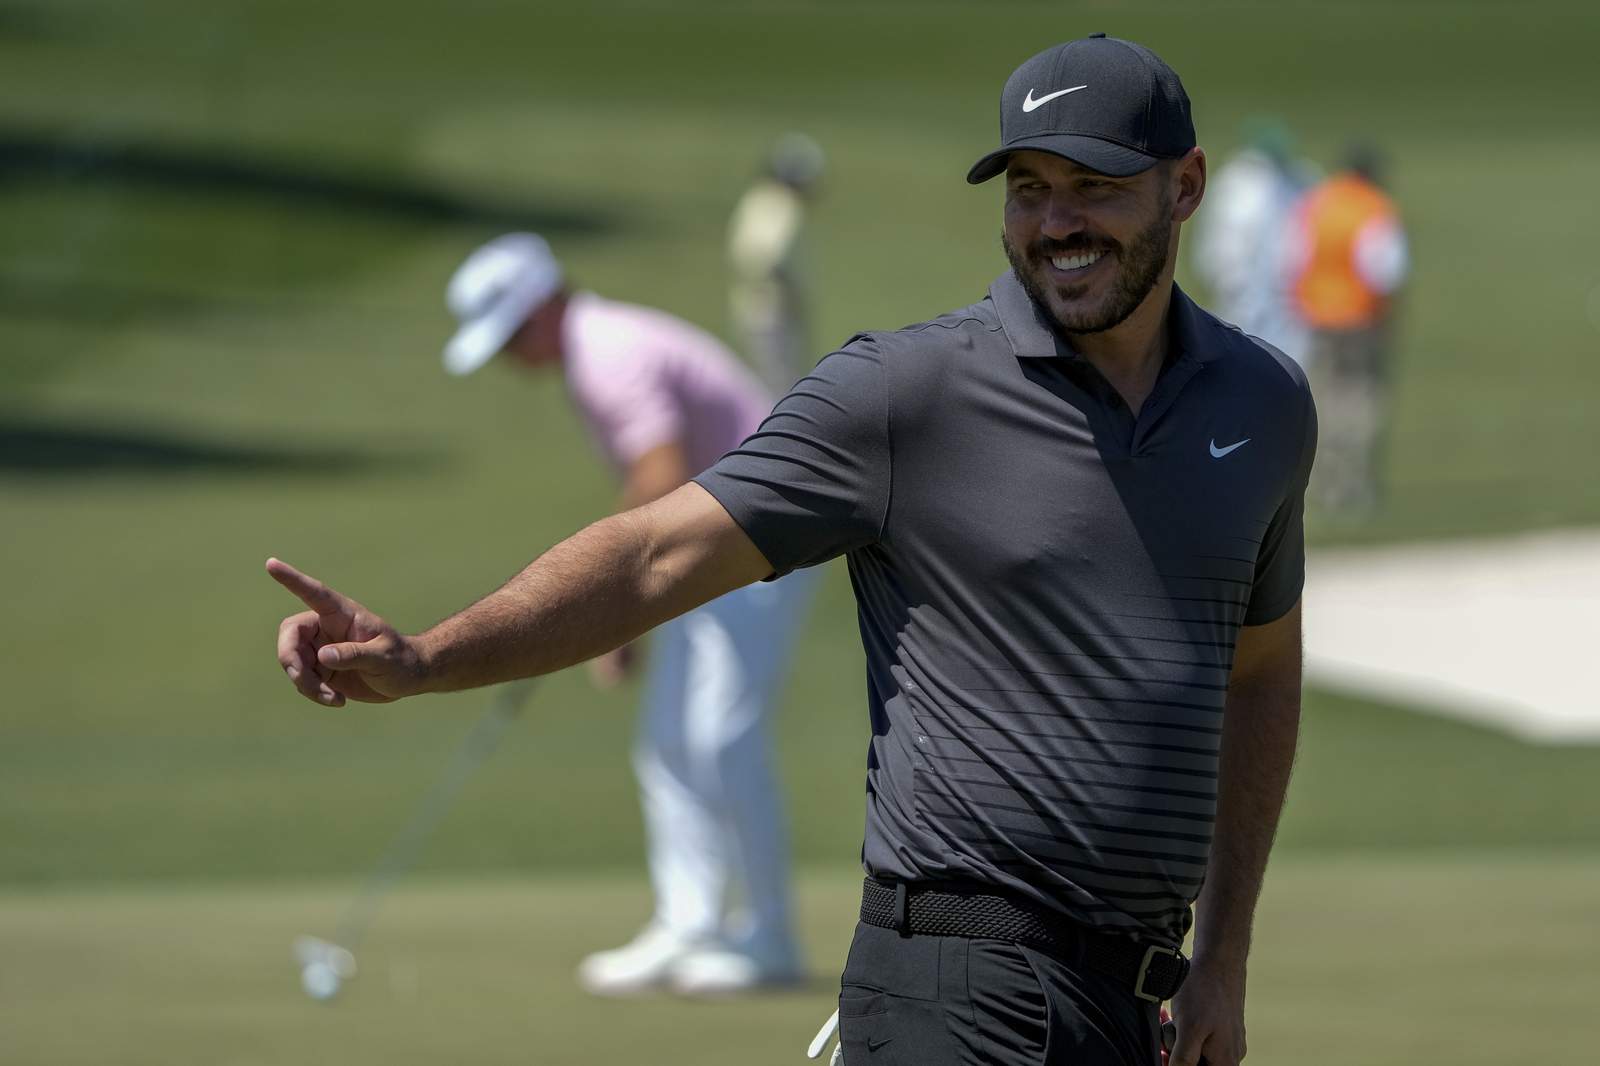 Koepka hobbled, but plans to fight through at the Masters